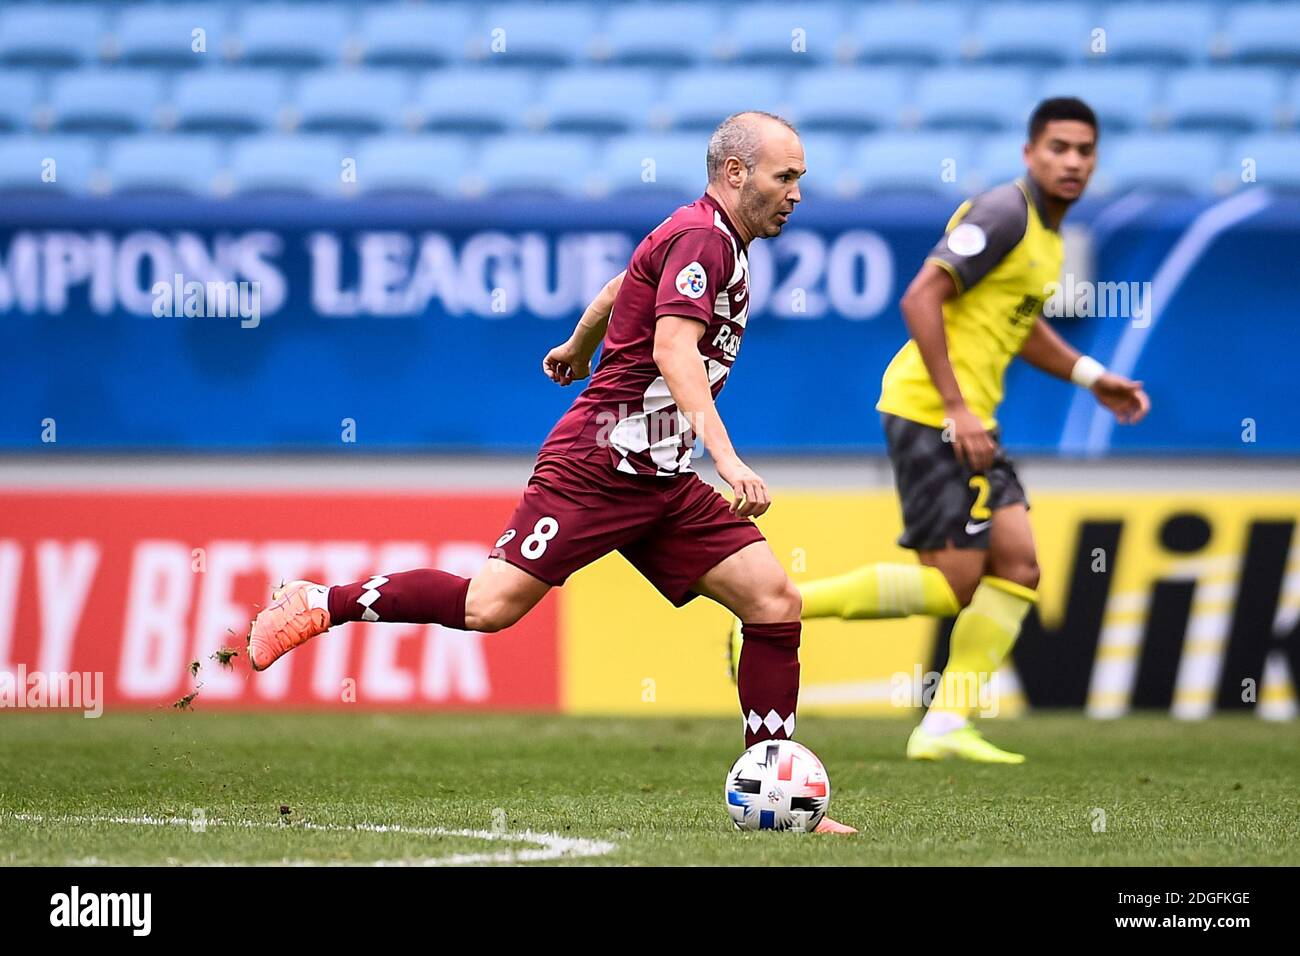 Spanish professional footballer Andres Iniesta  of Vissel Kobe, left, runs the ball during the group match against Guangzhou Evergrande Taobao F.C. at Stock Photo